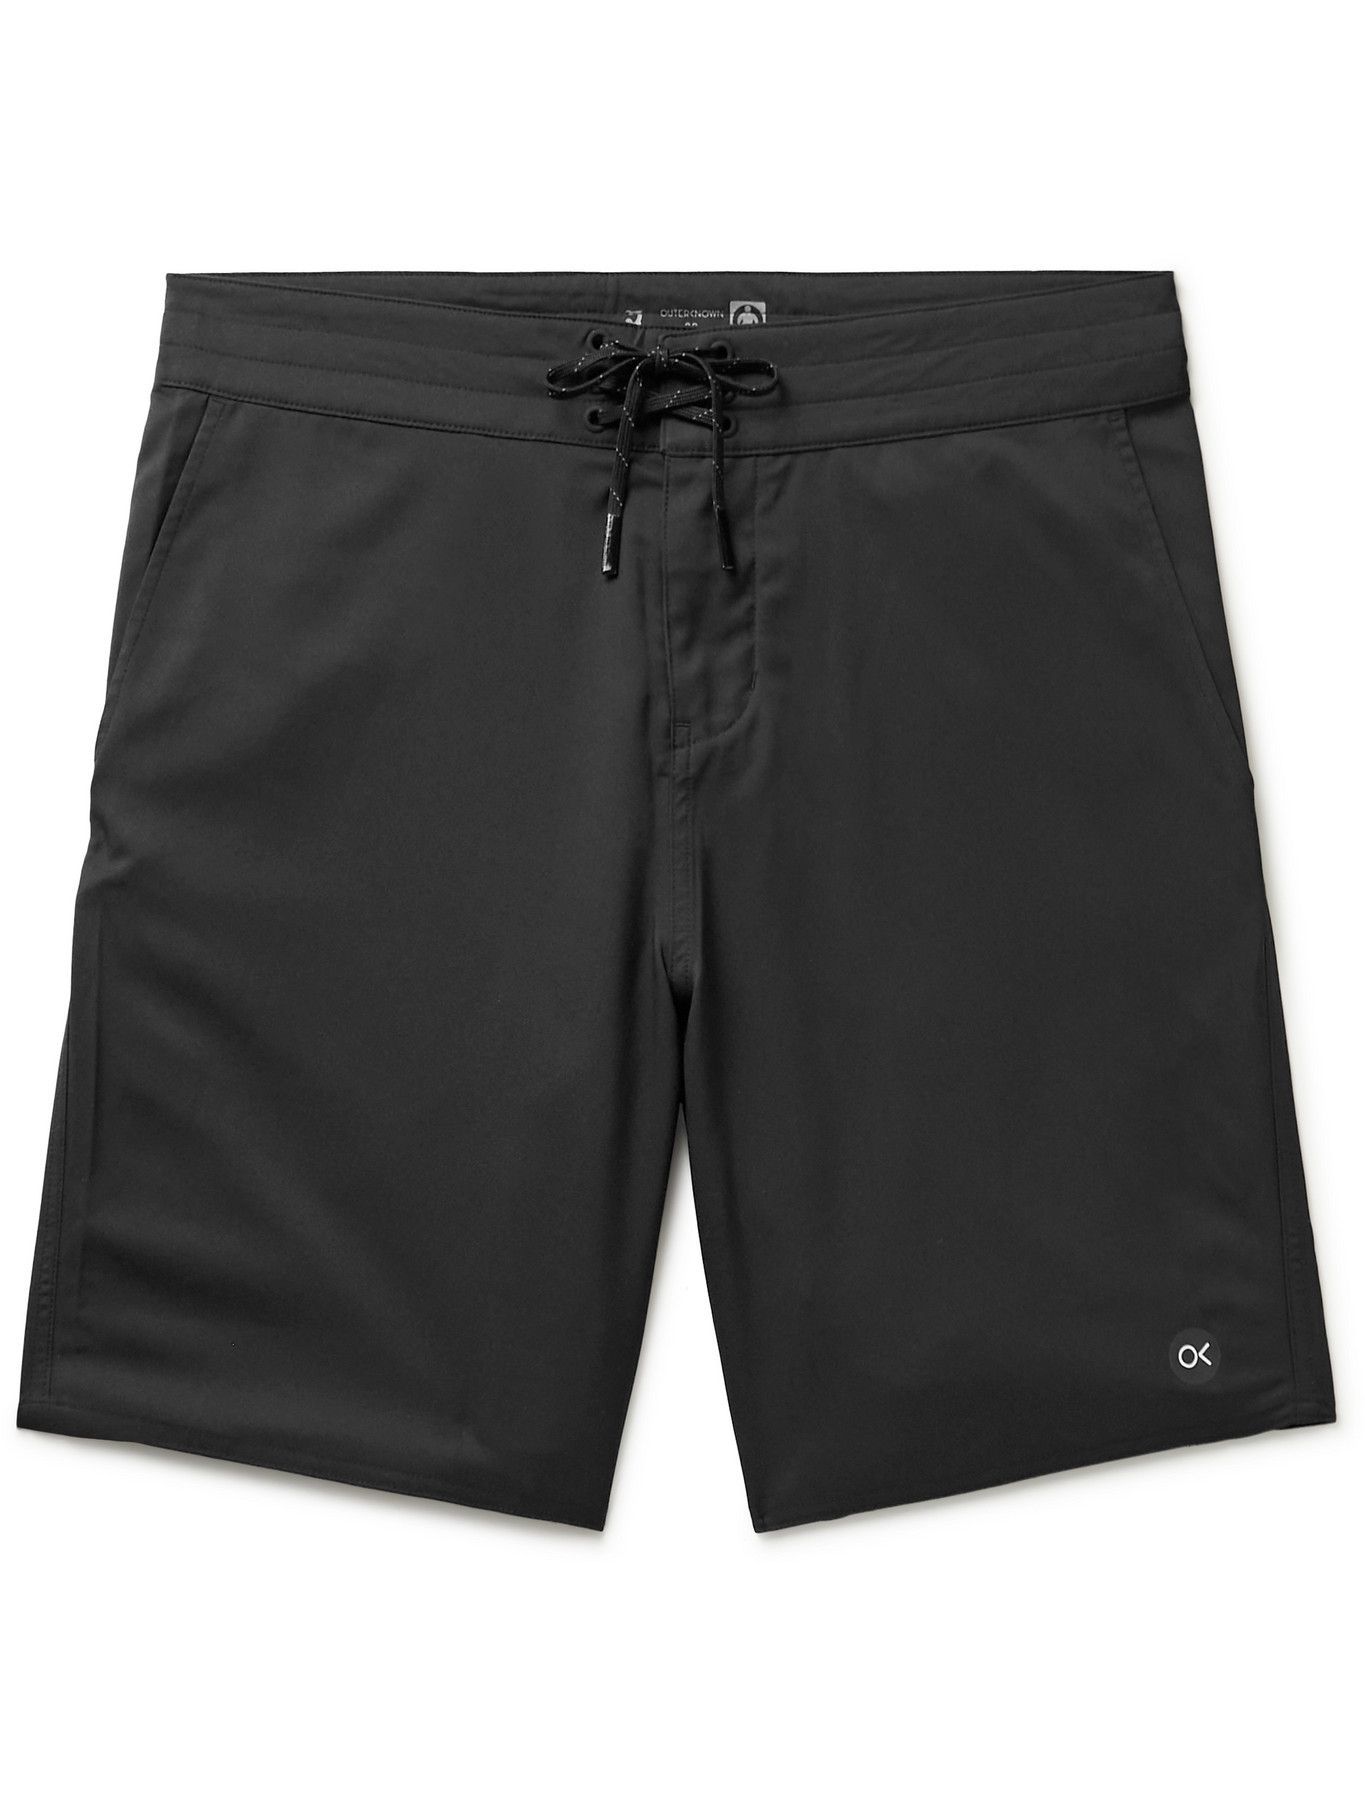 OUTERKNOWN - Apex Long-Length Swim Shorts - Black Outerknown